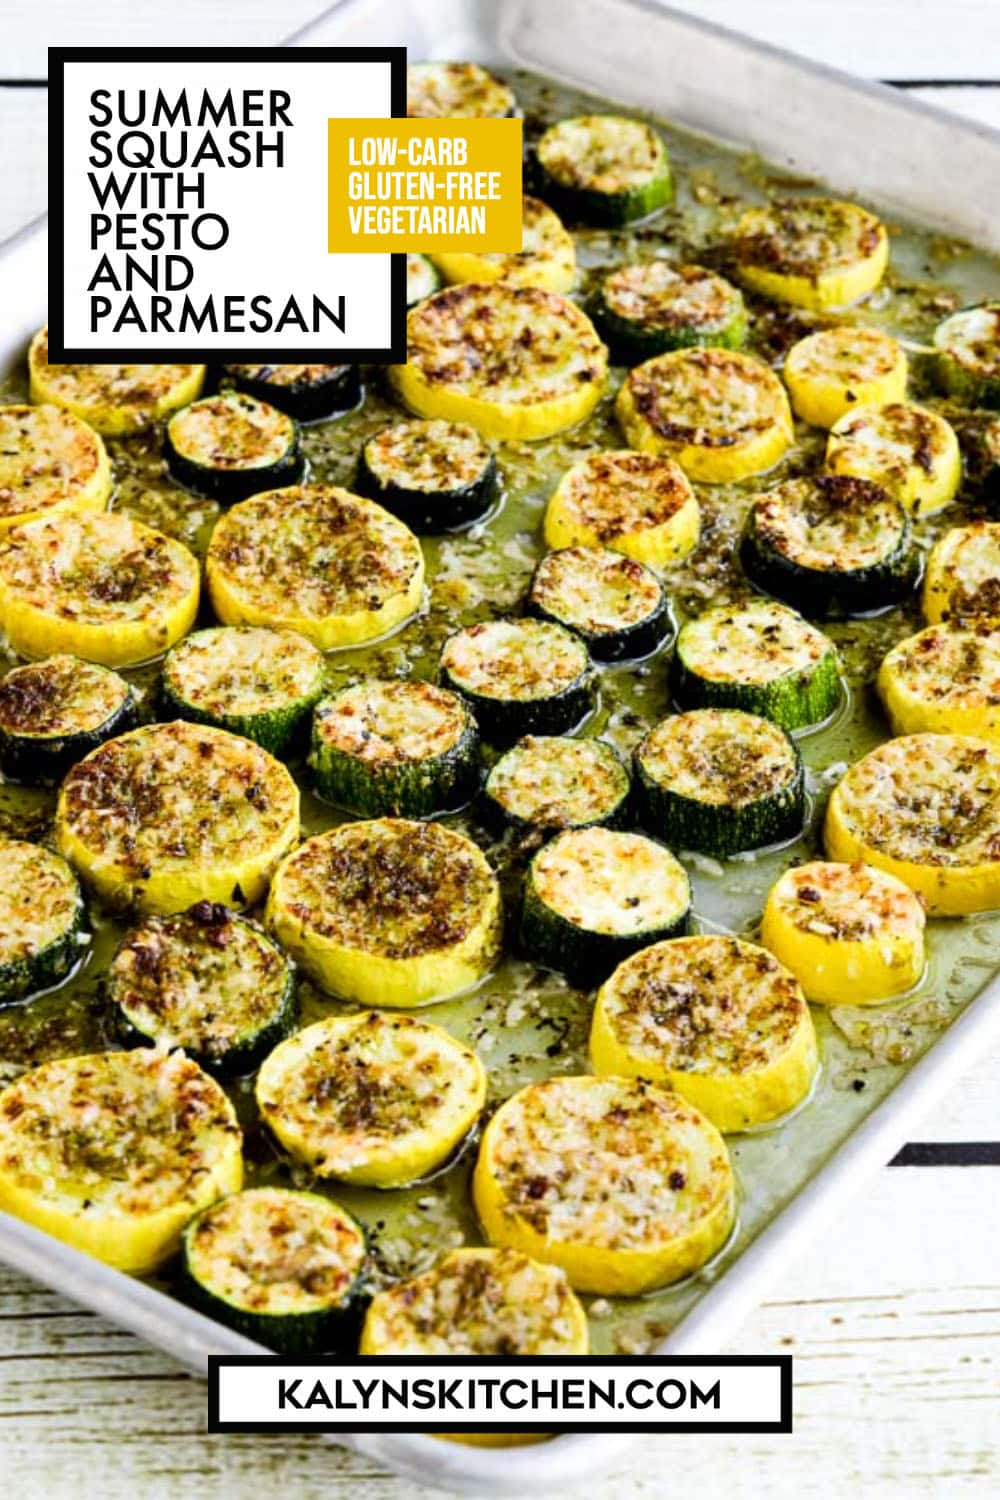 Pinterest image of Summer Squash with Pesto and Parmesan